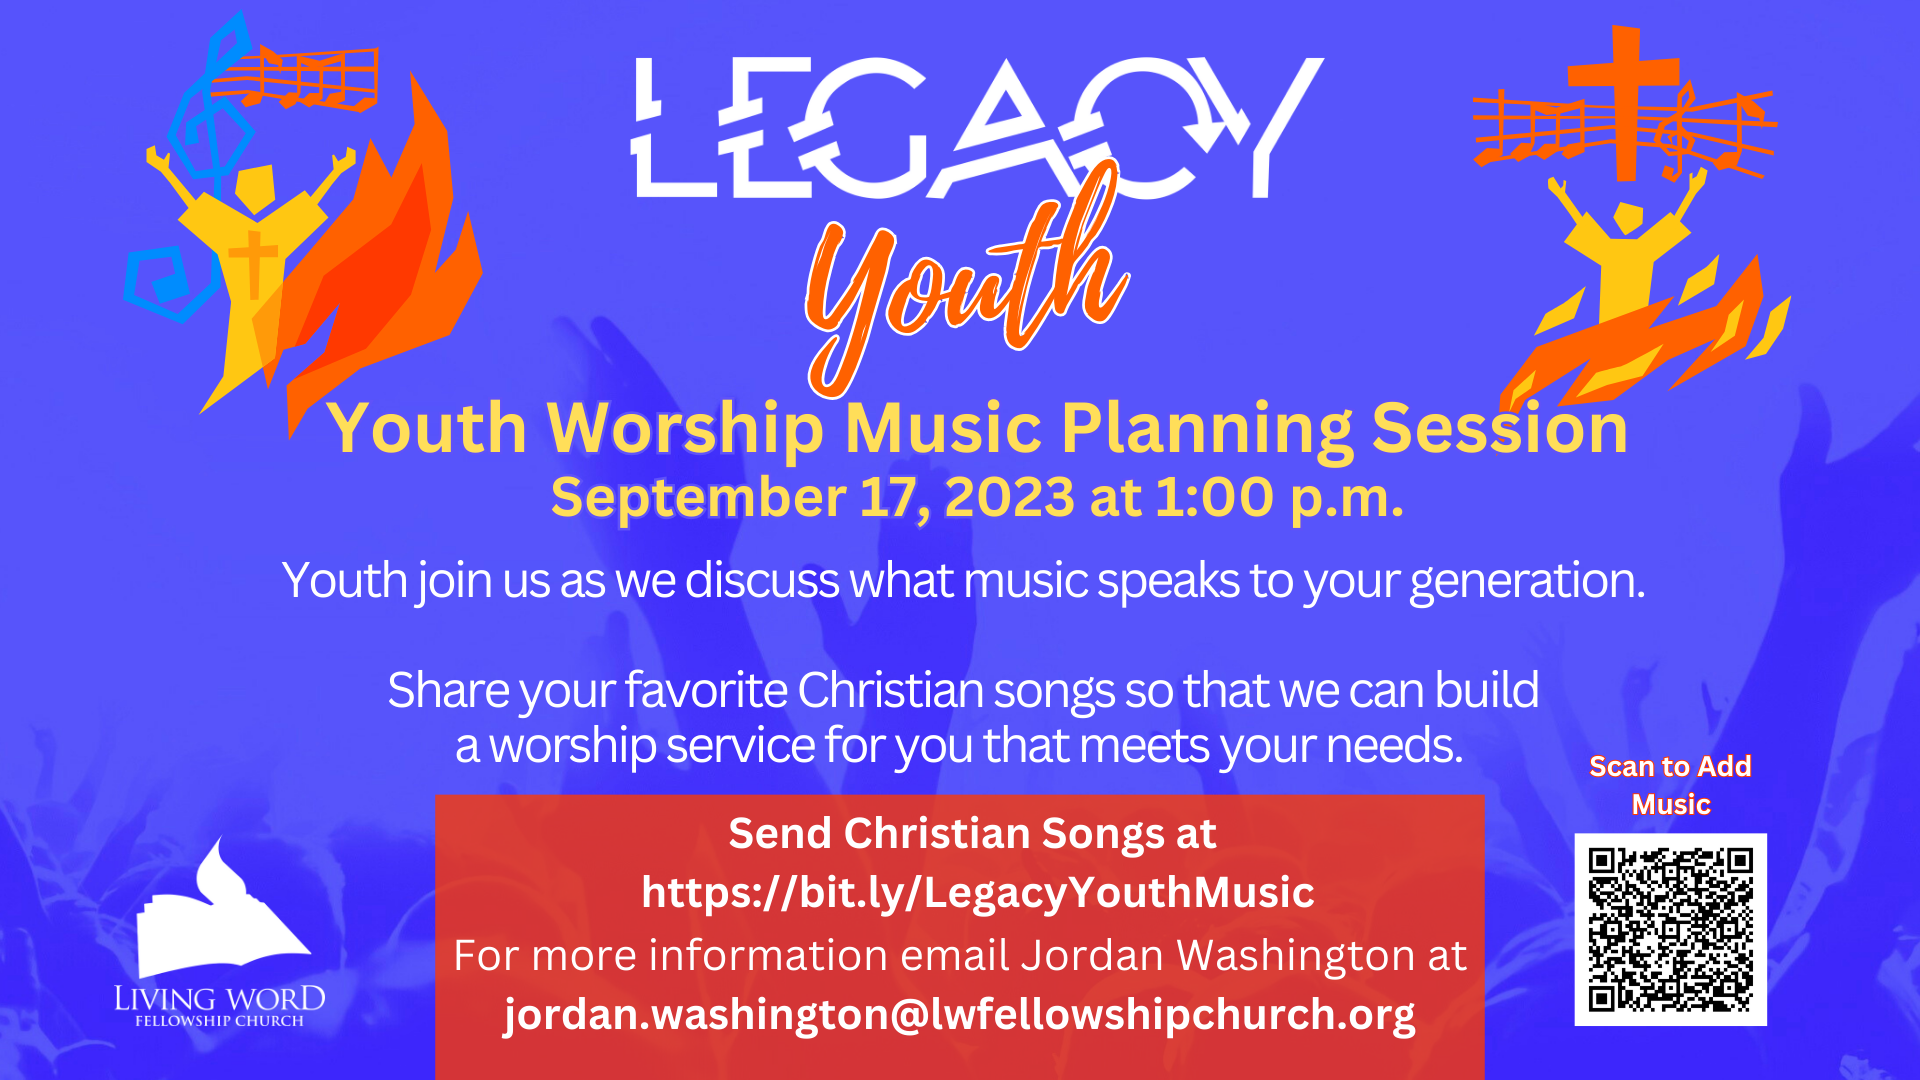 Youth Worship Music Planning Session head image